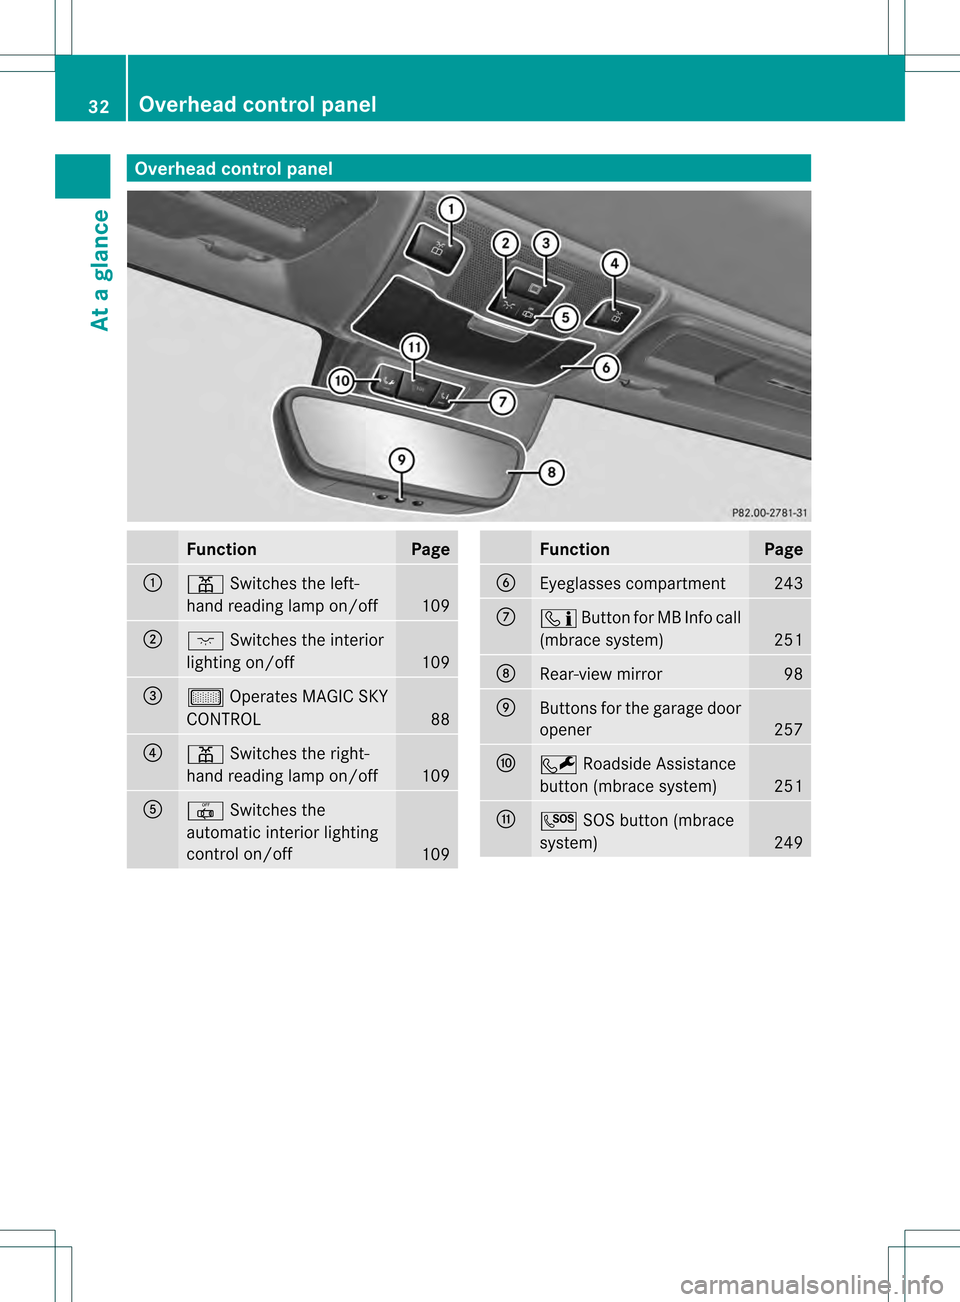 MERCEDES-BENZ SLK350 2012 R172 Owners Guide Overhea
dcontrol panel Function Page
0002
0010
Switches the left-
hand reading lamp on/off 109
0003
0002
Switches the interior
lighting on/off 109
0023
000C
Operates MAGIC SKY
CONTROL 88
0022
0010
Swi